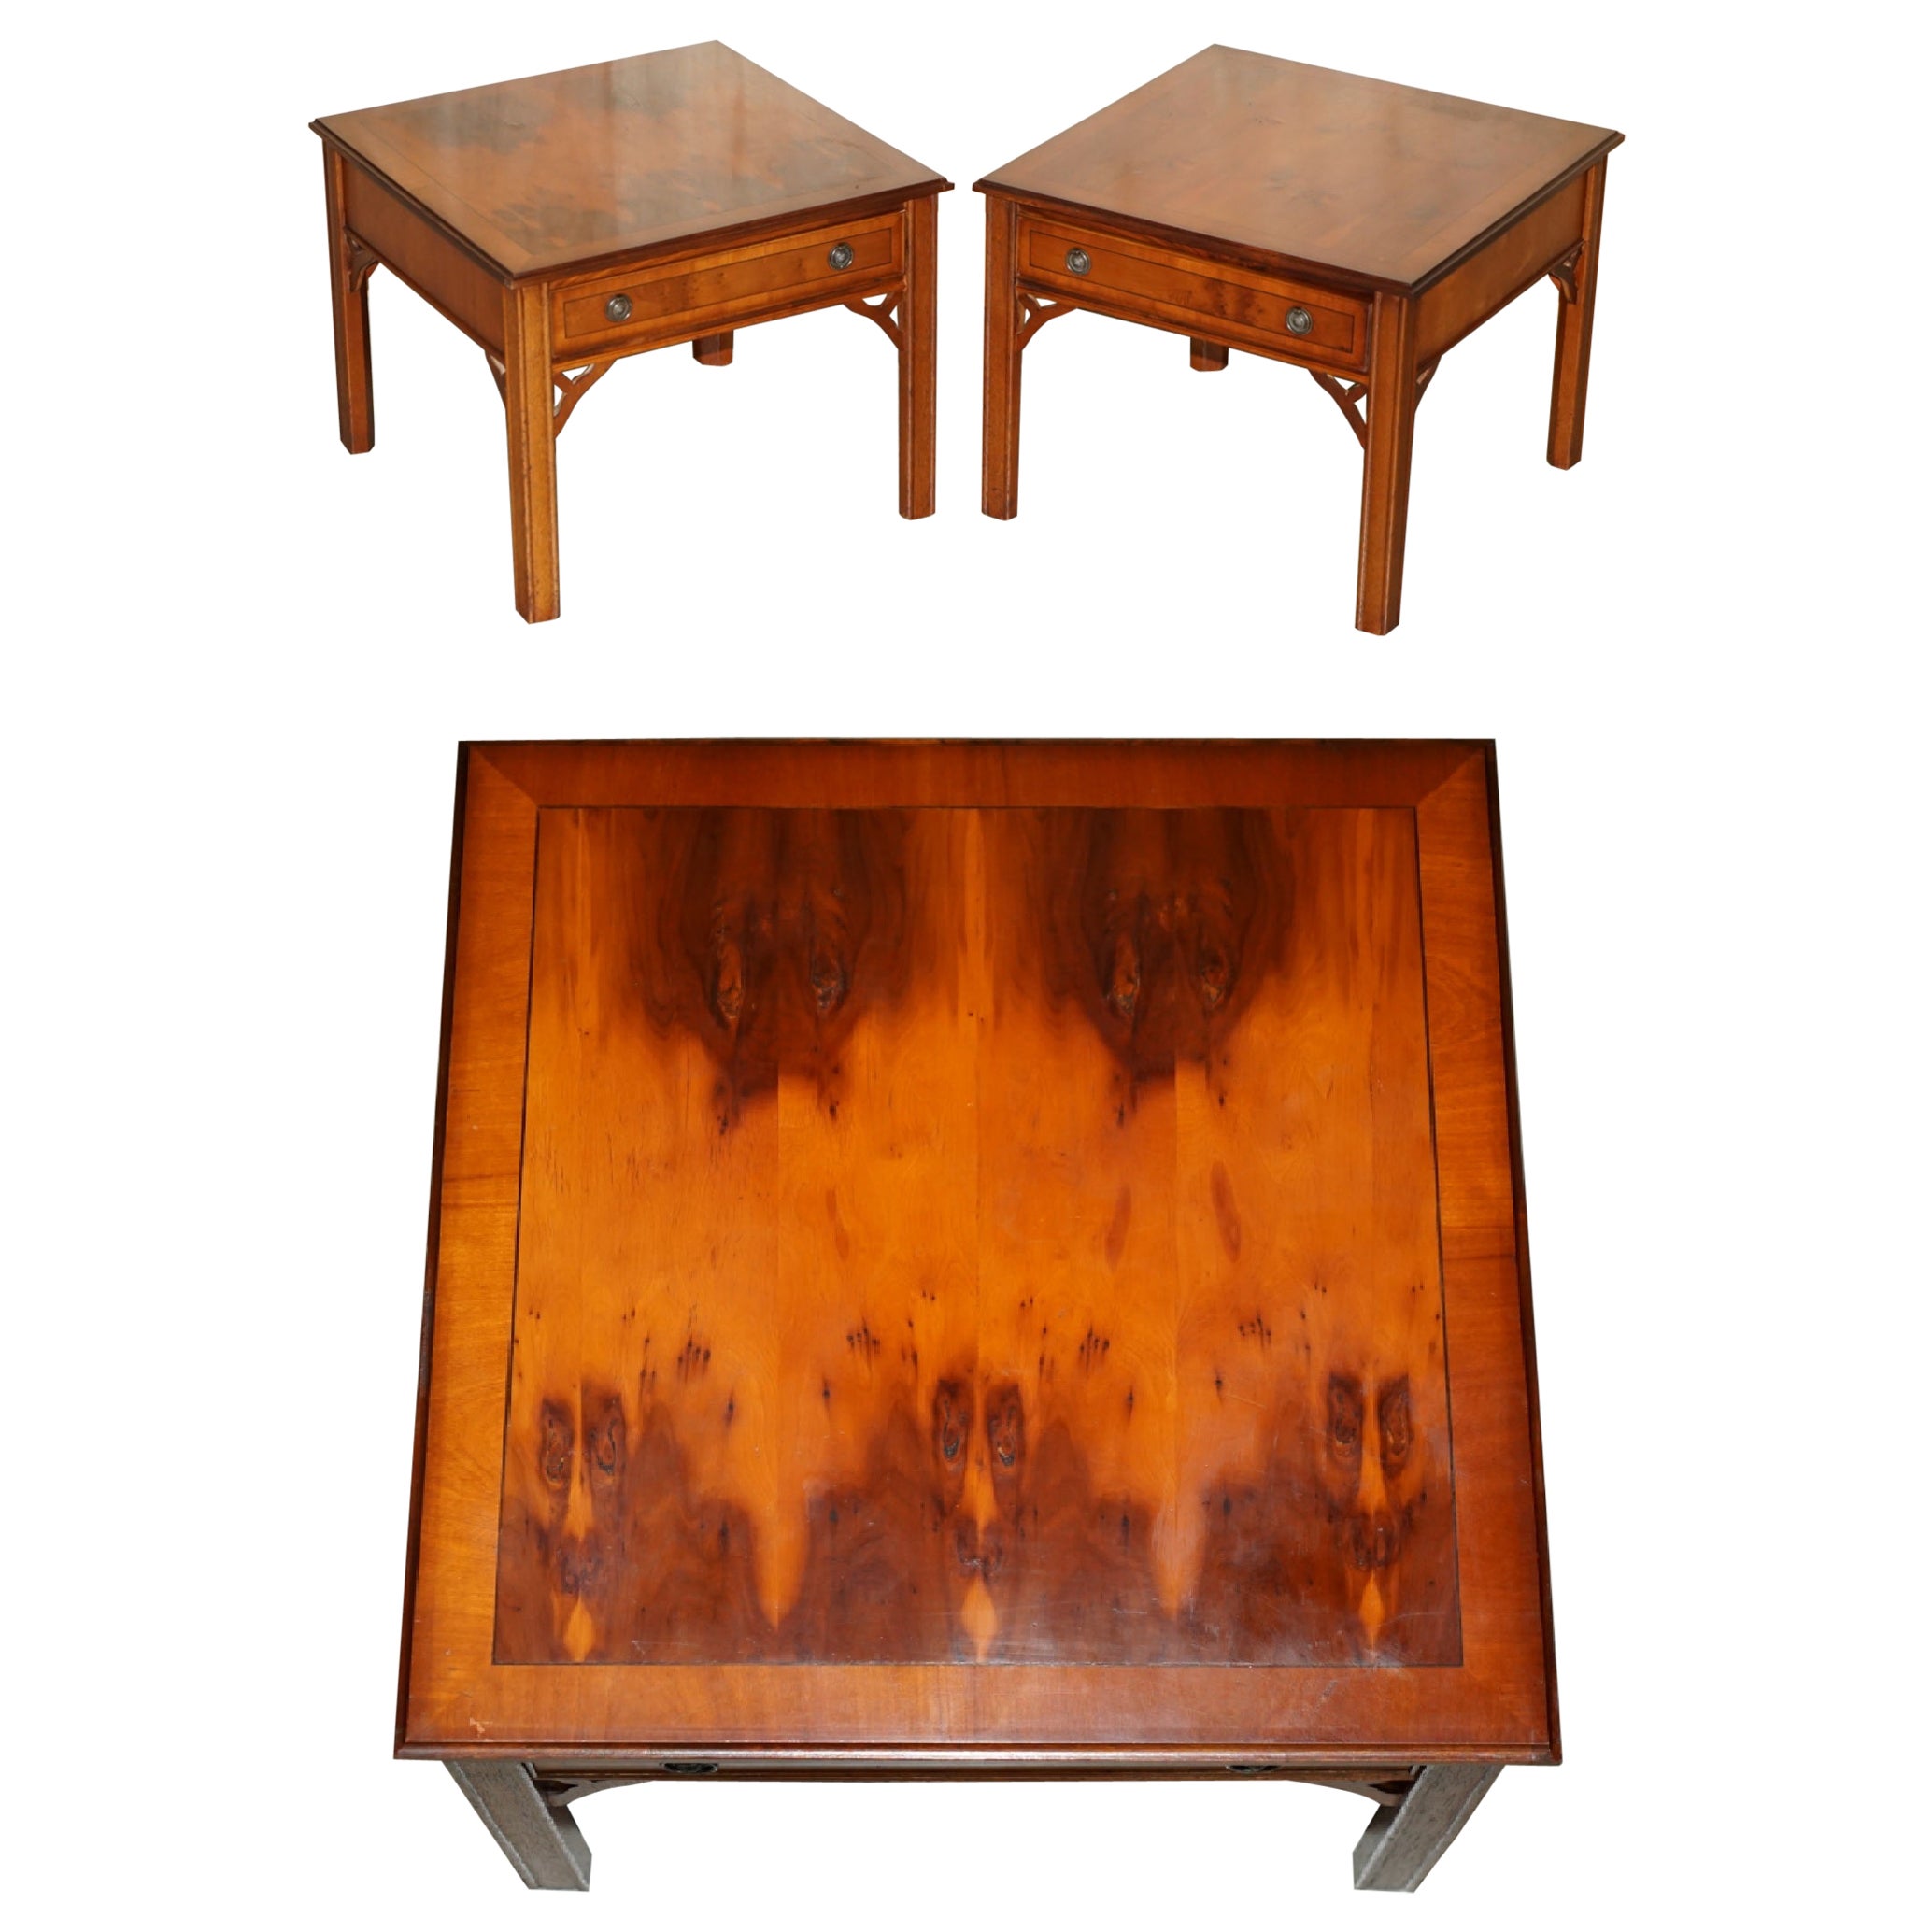 LOVELY PAIR OF BURR YEW WOOD SiDE END LAMP WINE TABLES MIT LARGE SINGLE DRAWERS im Angebot